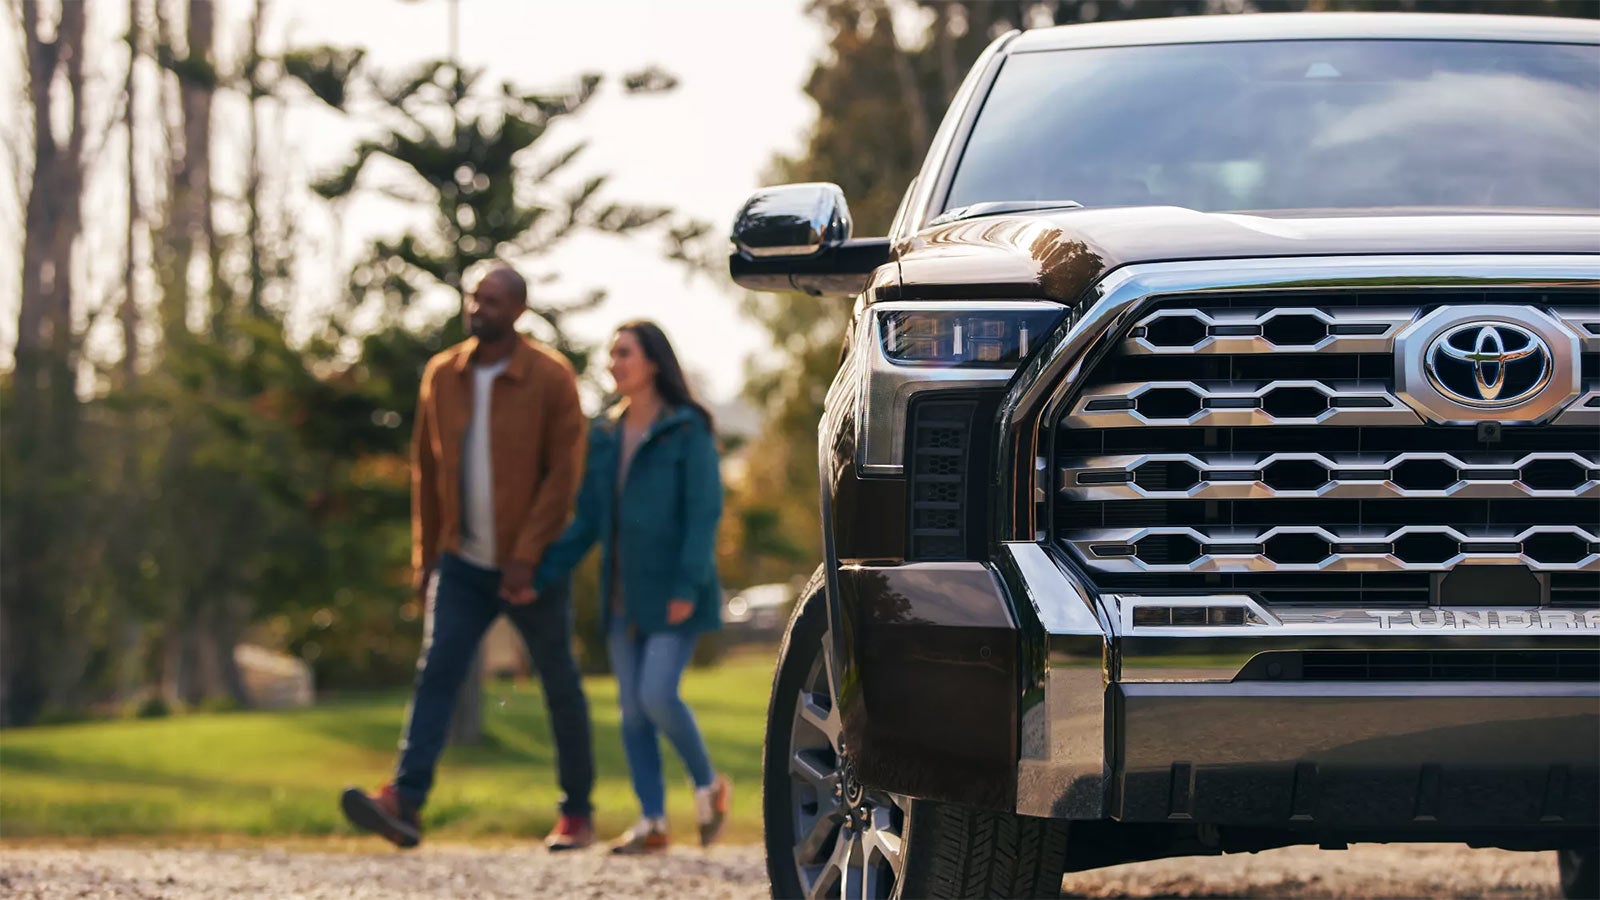 2022 Toyota Tundra Gallery | Baierl Toyota in Mars PA